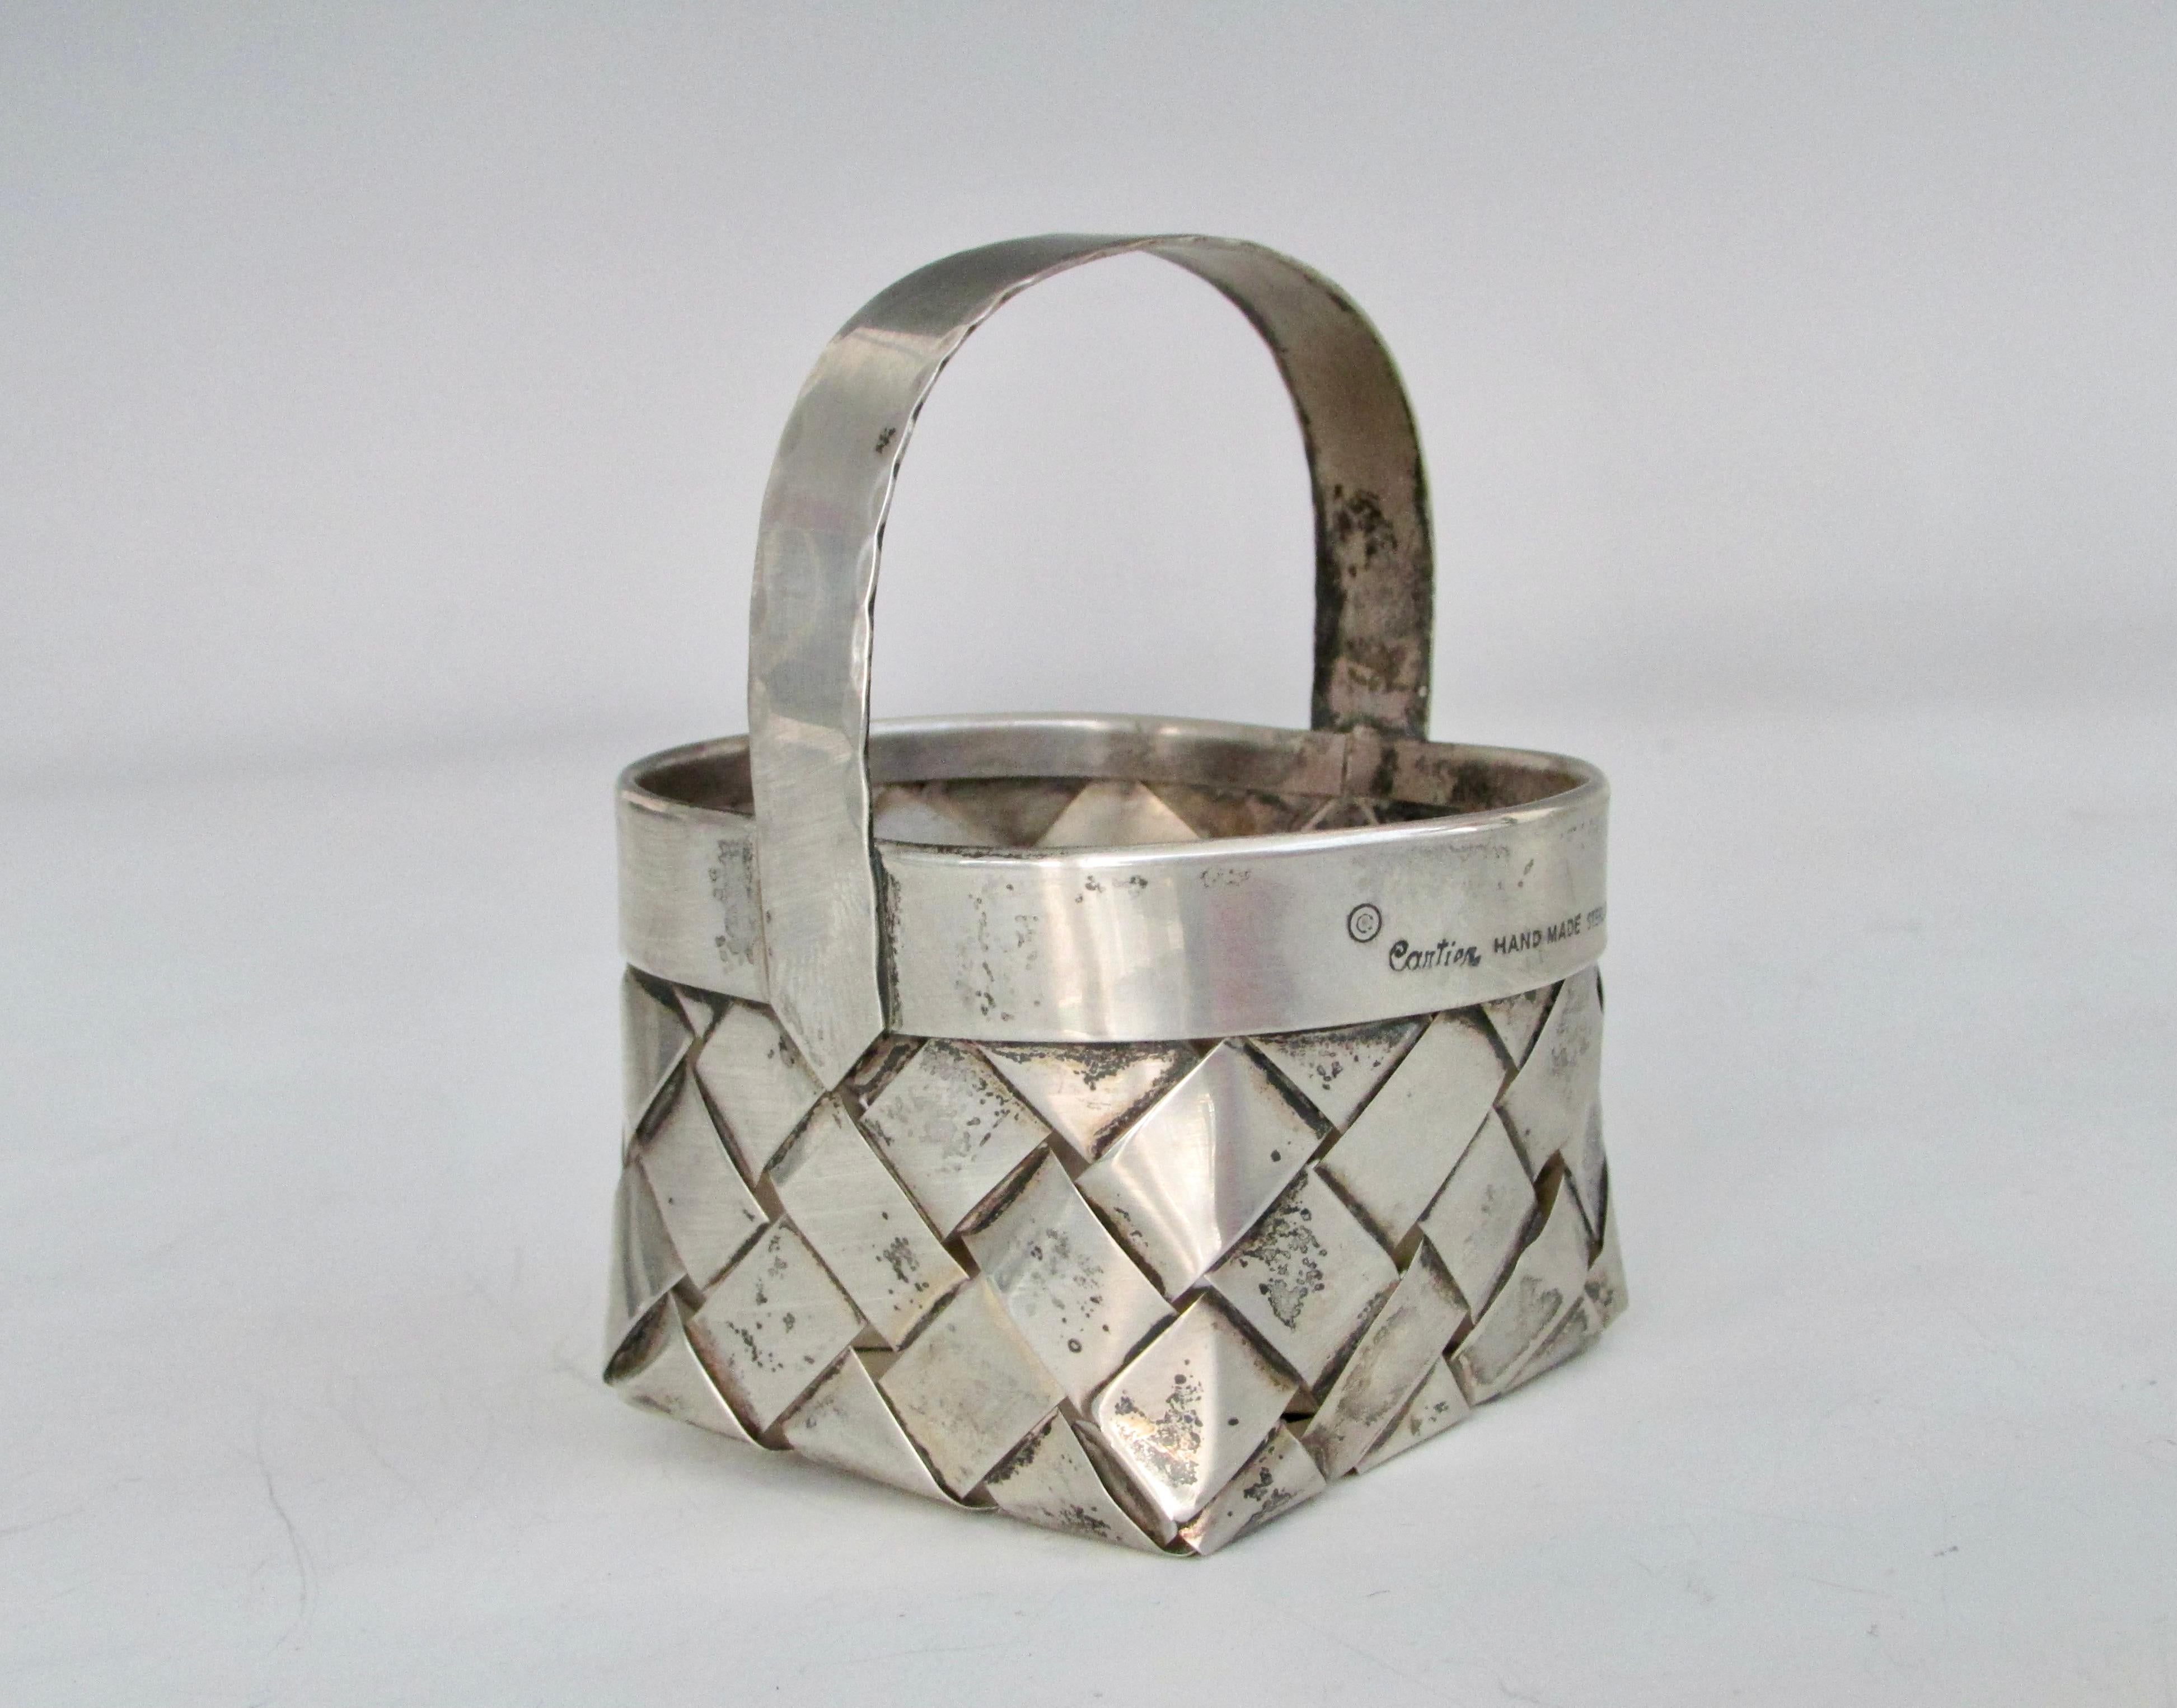 Hand Made Cartier Woven Sterling Silver Basket 1